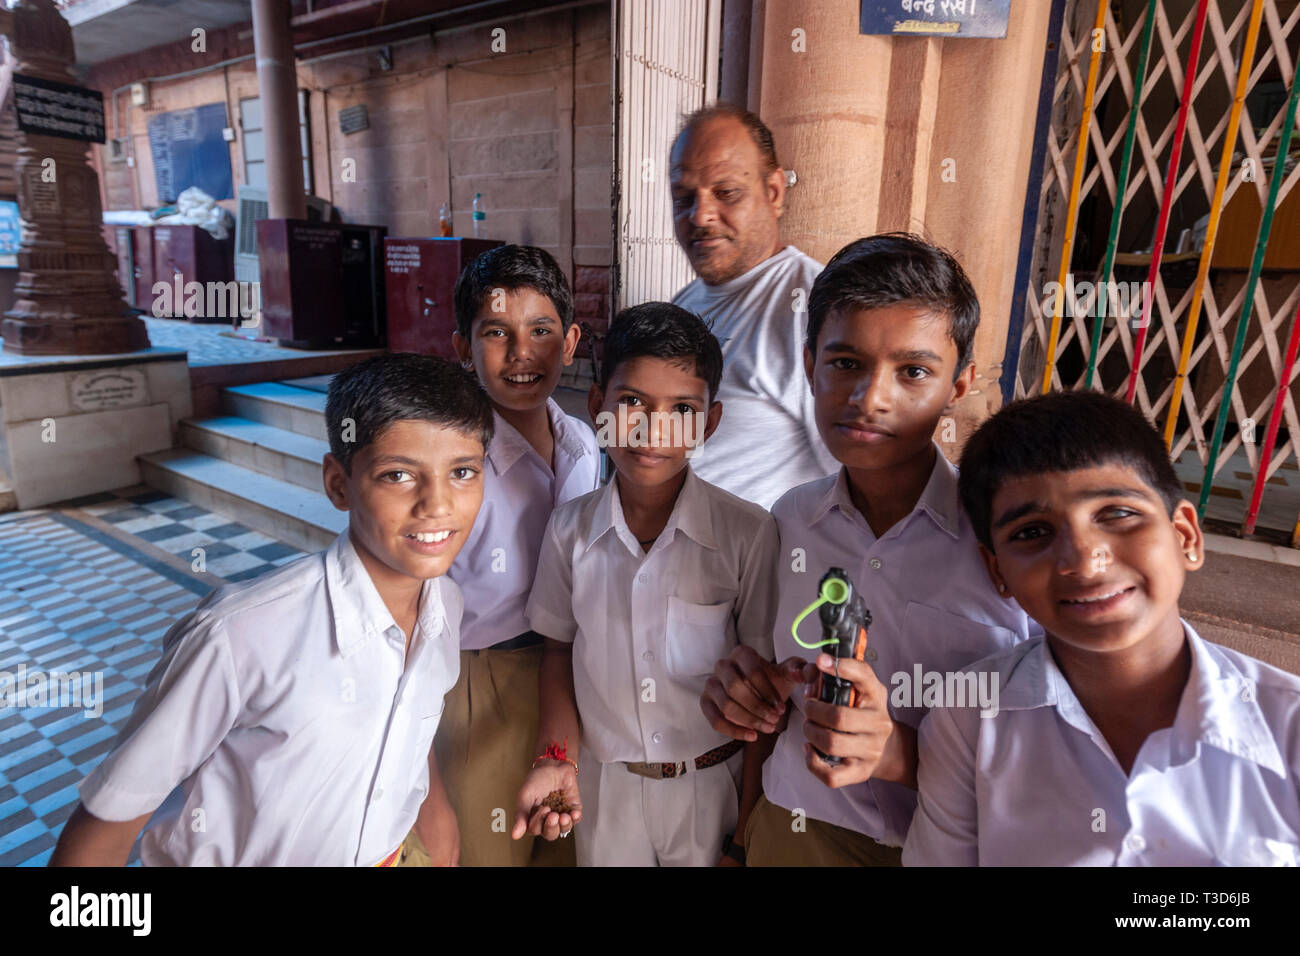 Students boys with a water toy gun in Rajasthan, India Stock Photo ...